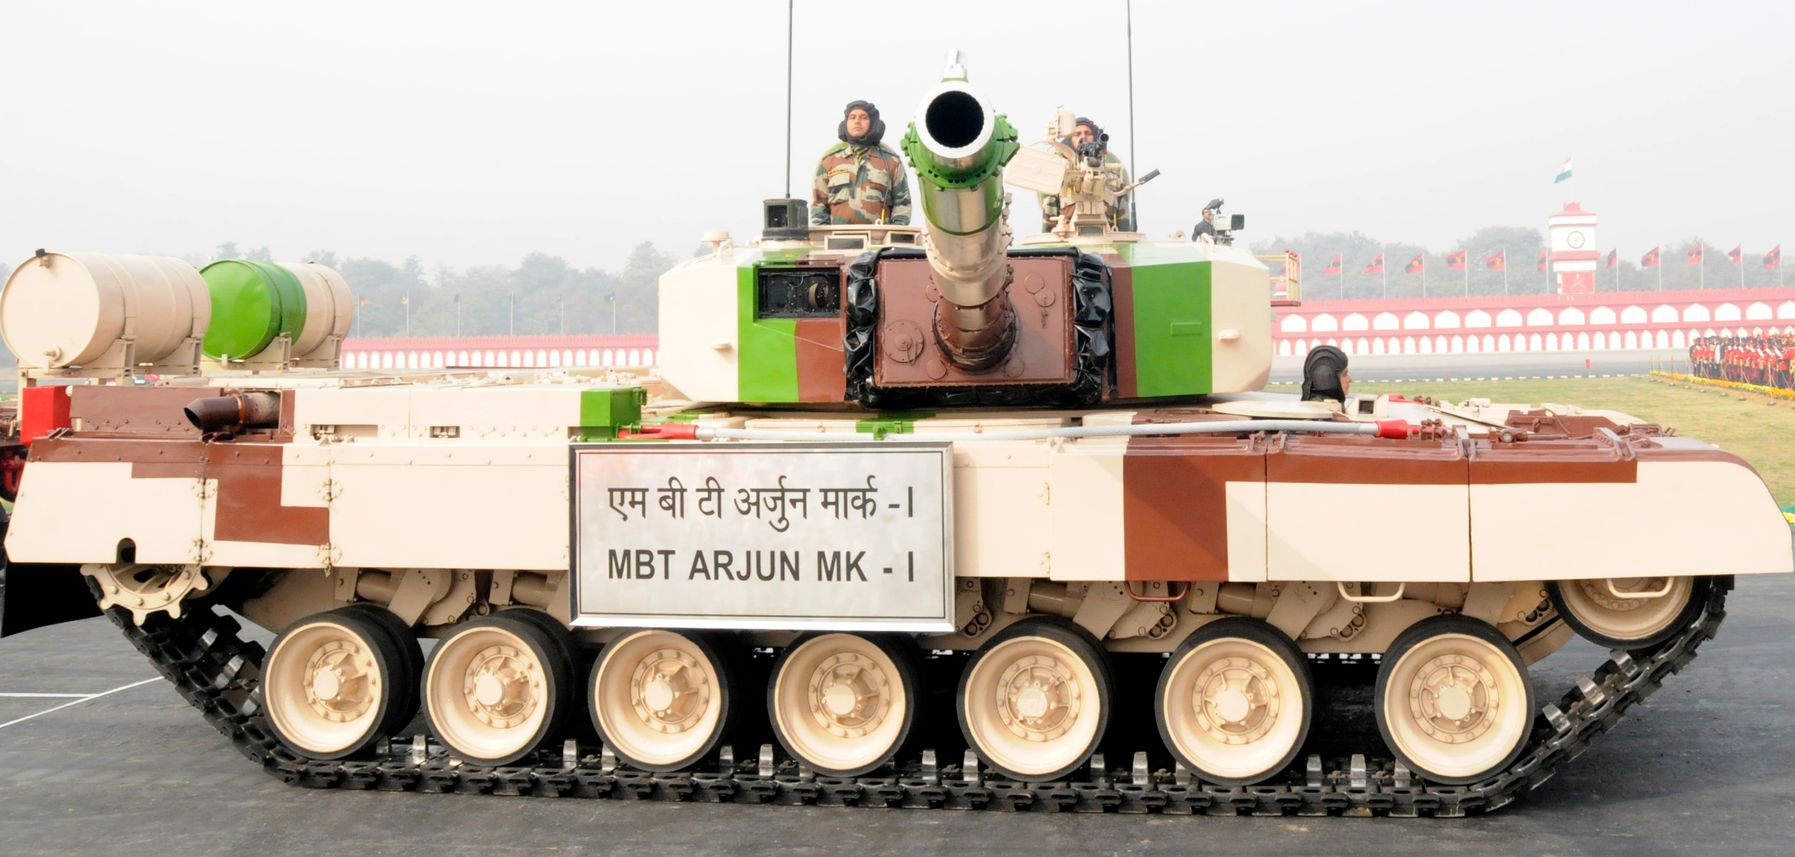 Meet the The Tank That Took India 35 Years Build | The Interest